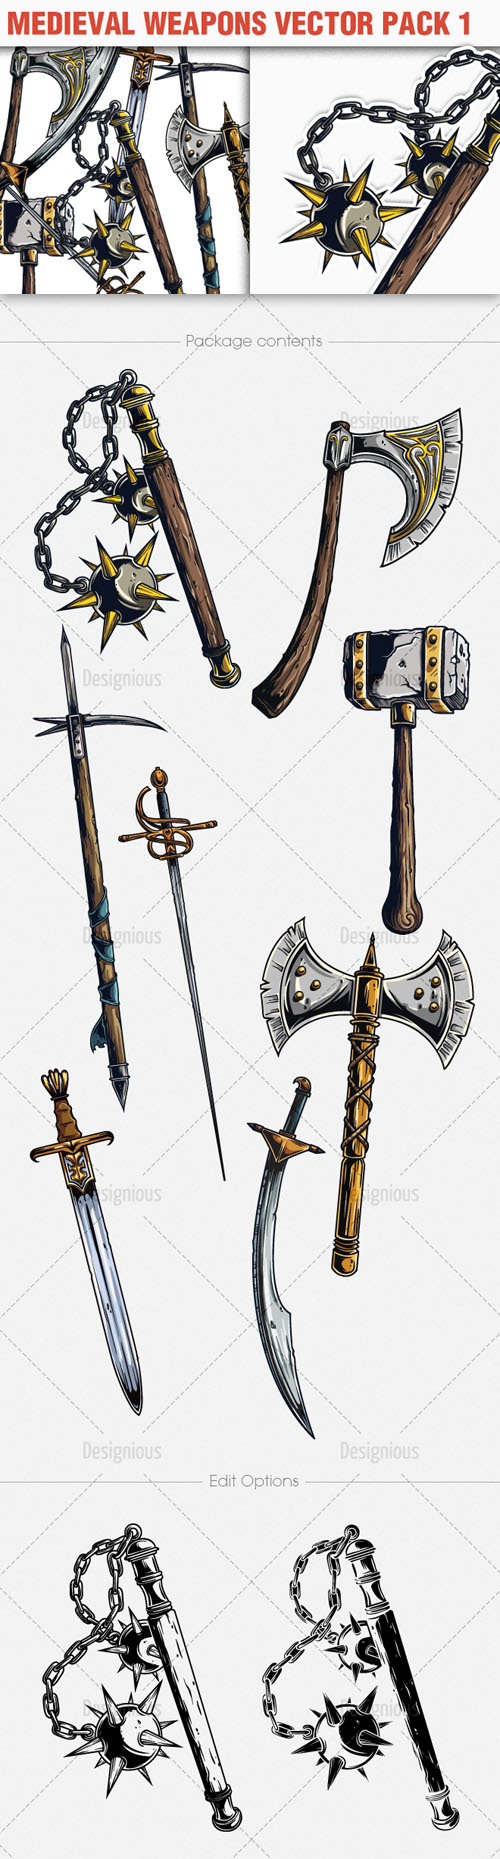 Medieval Weapons Photoshop Vector Pack 1